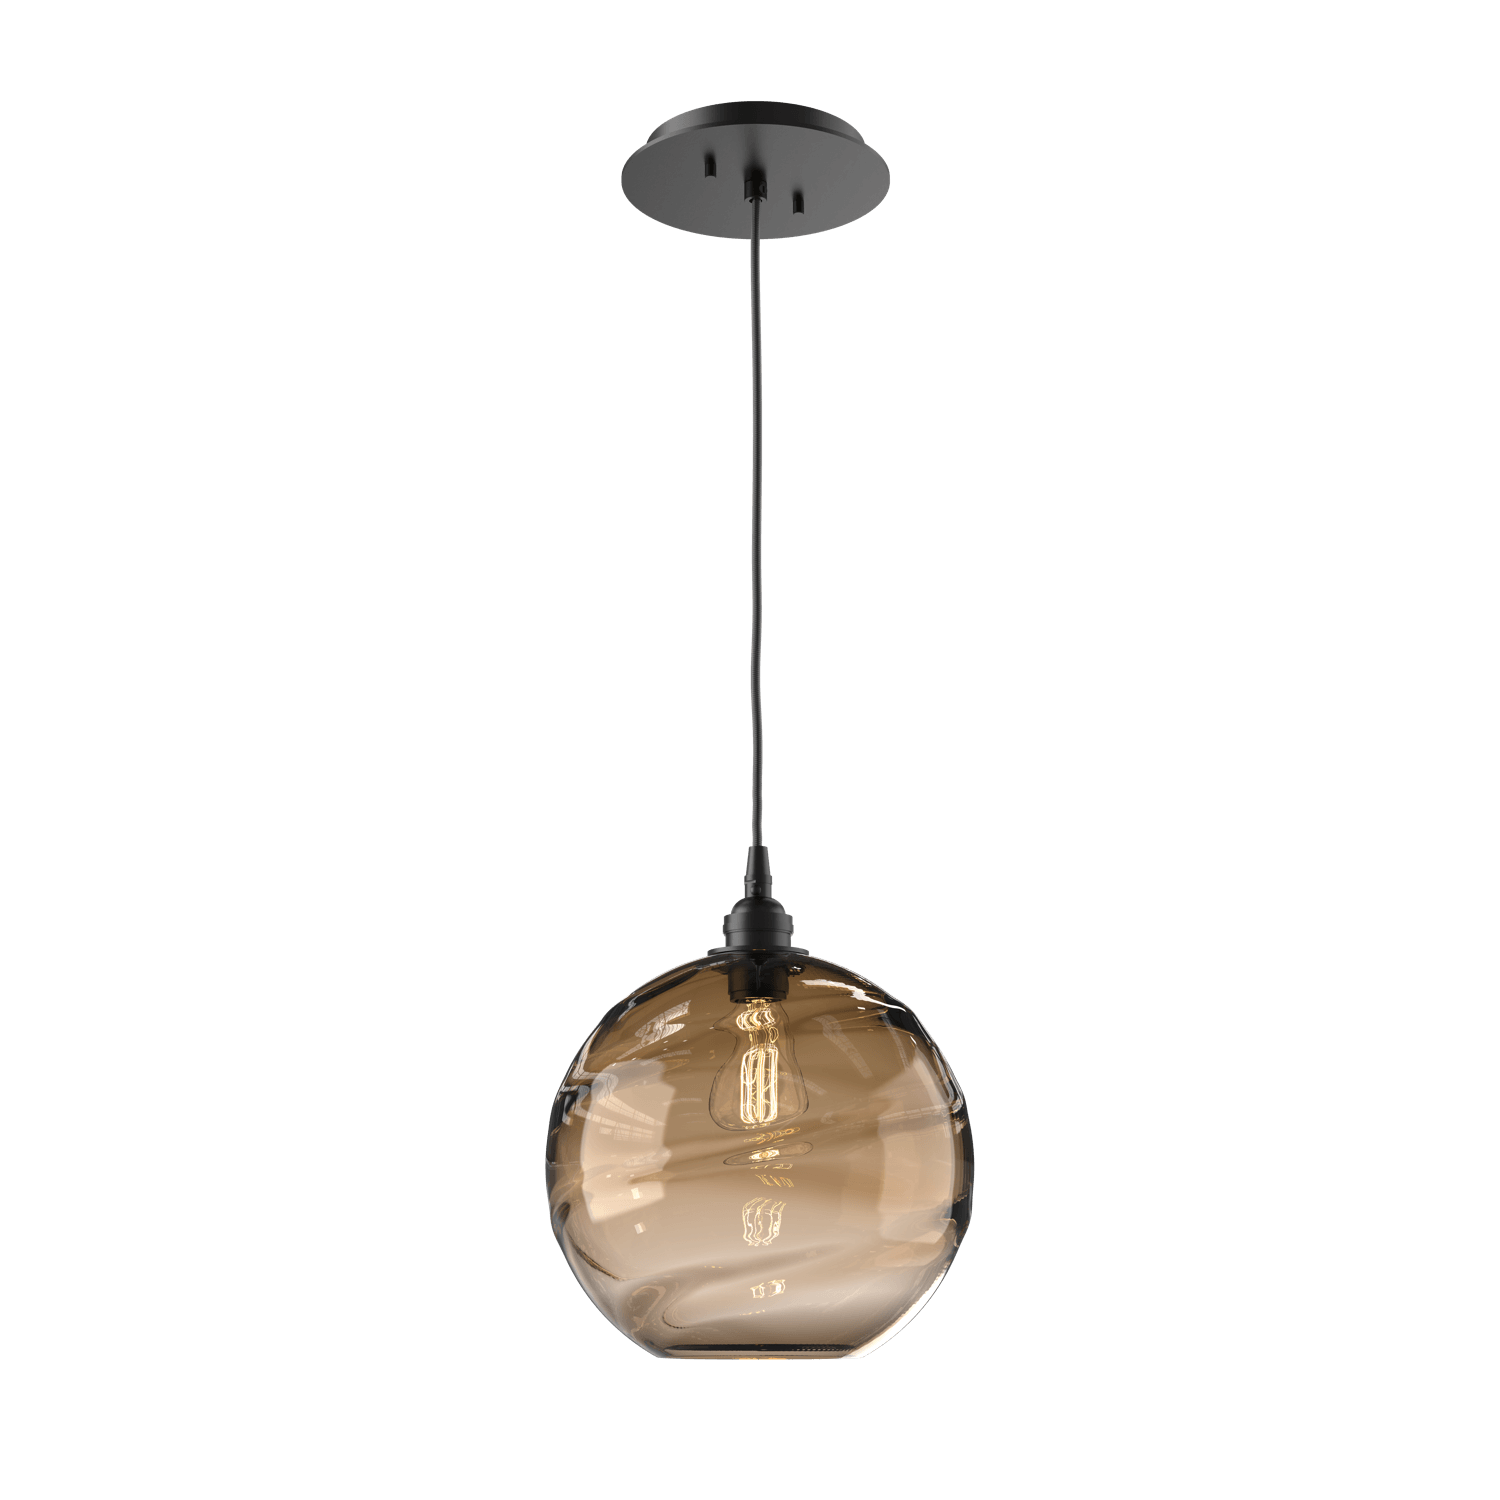 LAB0047-01-MB-OB-Hammerton-Studio-Optic-Blown-Glass-Terra-pendant-light-with-matte-black-finish-and-optic-bronze-blown-glass-shades-and-incandescent-lamping